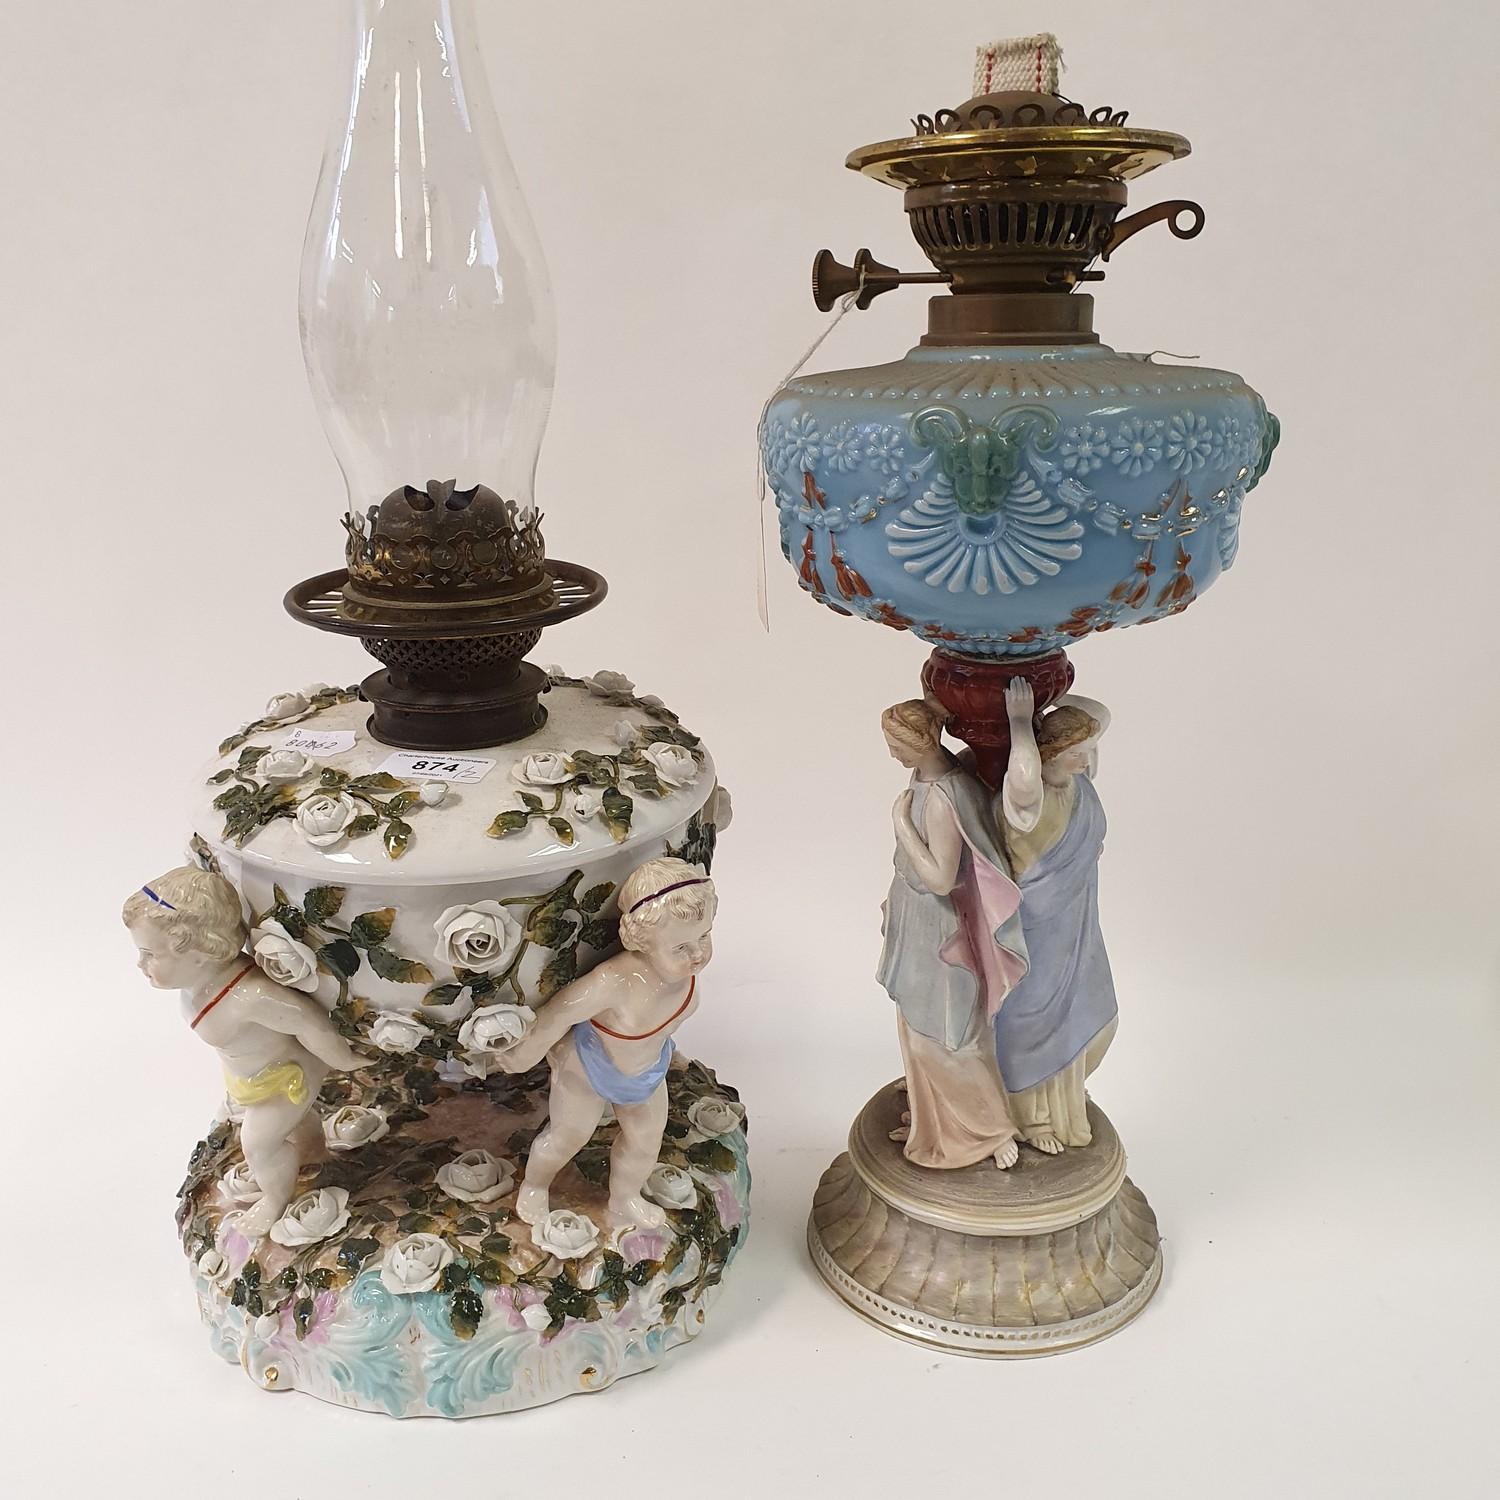 A Dresden porcelain oil lamp, flower encrusted well raised by three putti, 55 cm high, and an oil